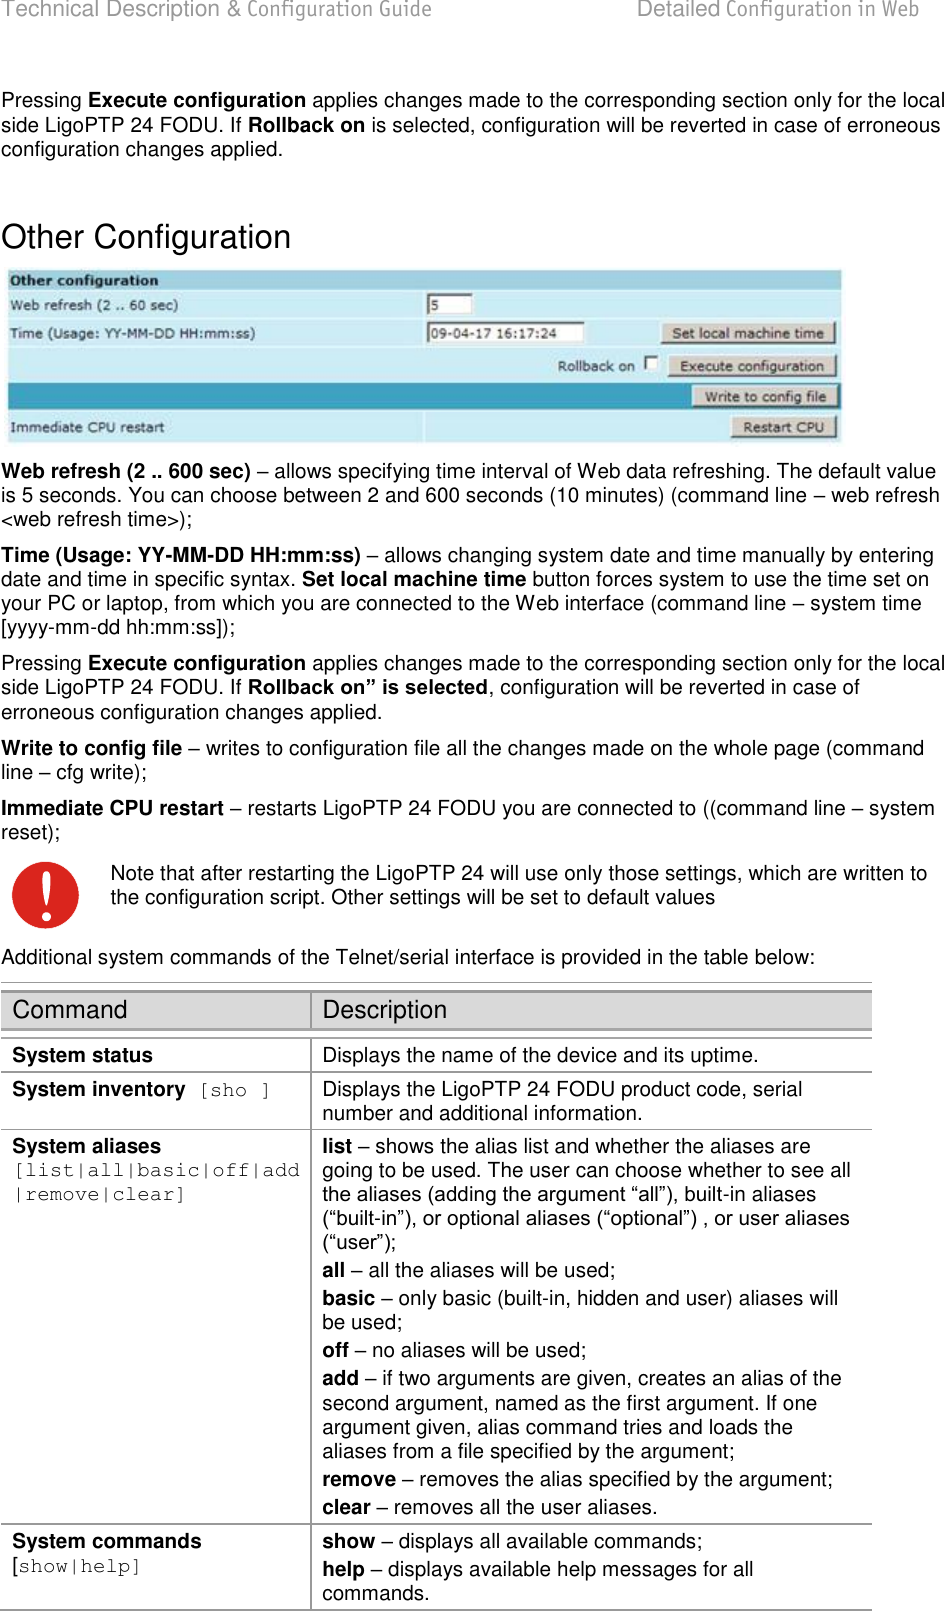 Technical Description &amp; Configuration Guide  Detailed Configuration in Web  LigoWave  Page 43 Pressing Execute configuration applies changes made to the corresponding section only for the local side LigoPTP 24 FODU. If Rollback on is selected, configuration will be reverted in case of erroneous configuration changes applied.  Other Configuration  Web refresh (2 .. 600 sec)  allows specifying time interval of Web data refreshing. The default value is 5 seconds. You can choose between 2 and 600 seconds (10 minutes) (command line  web refresh &lt;web refresh time&gt;); Time (Usage: YY-MM-DD HH:mm:ss)  allows changing system date and time manually by entering date and time in specific syntax. Set local machine time button forces system to use the time set on your PC or laptop, from which you are connected to the Web interface (command line  system time [yyyy-mm-dd hh:mm:ss]); Pressing Execute configuration applies changes made to the corresponding section only for the local side LigoPTP 24 FODU. If Rollback on” is selected, configuration will be reverted in case of erroneous configuration changes applied. Write to config file  writes to configuration file all the changes made on the whole page (command line  cfg write); Immediate CPU restart  restarts LigoPTP 24 FODU you are connected to ((command line  system reset);  Note that after restarting the LigoPTP 24 will use only those settings, which are written to the configuration script. Other settings will be set to default values Additional system commands of the Telnet/serial interface is provided in the table below: Command Description System status Displays the name of the device and its uptime. System inventory  [sho ] Displays the LigoPTP 24 FODU product code, serial number and additional information. System aliases  [list|all|basic|off|add|remove|clear] list  shows the alias list and whether the aliases are going to be used. The user can choose whether to see all -in aliases - all  all the aliases will be used; basic  only basic (built-in, hidden and user) aliases will be used; off  no aliases will be used; add  if two arguments are given, creates an alias of the second argument, named as the first argument. If one argument given, alias command tries and loads the aliases from a file specified by the argument; remove  removes the alias specified by the argument; clear  removes all the user aliases. System commands  [show|help] show  displays all available commands; help  displays available help messages for all commands. 